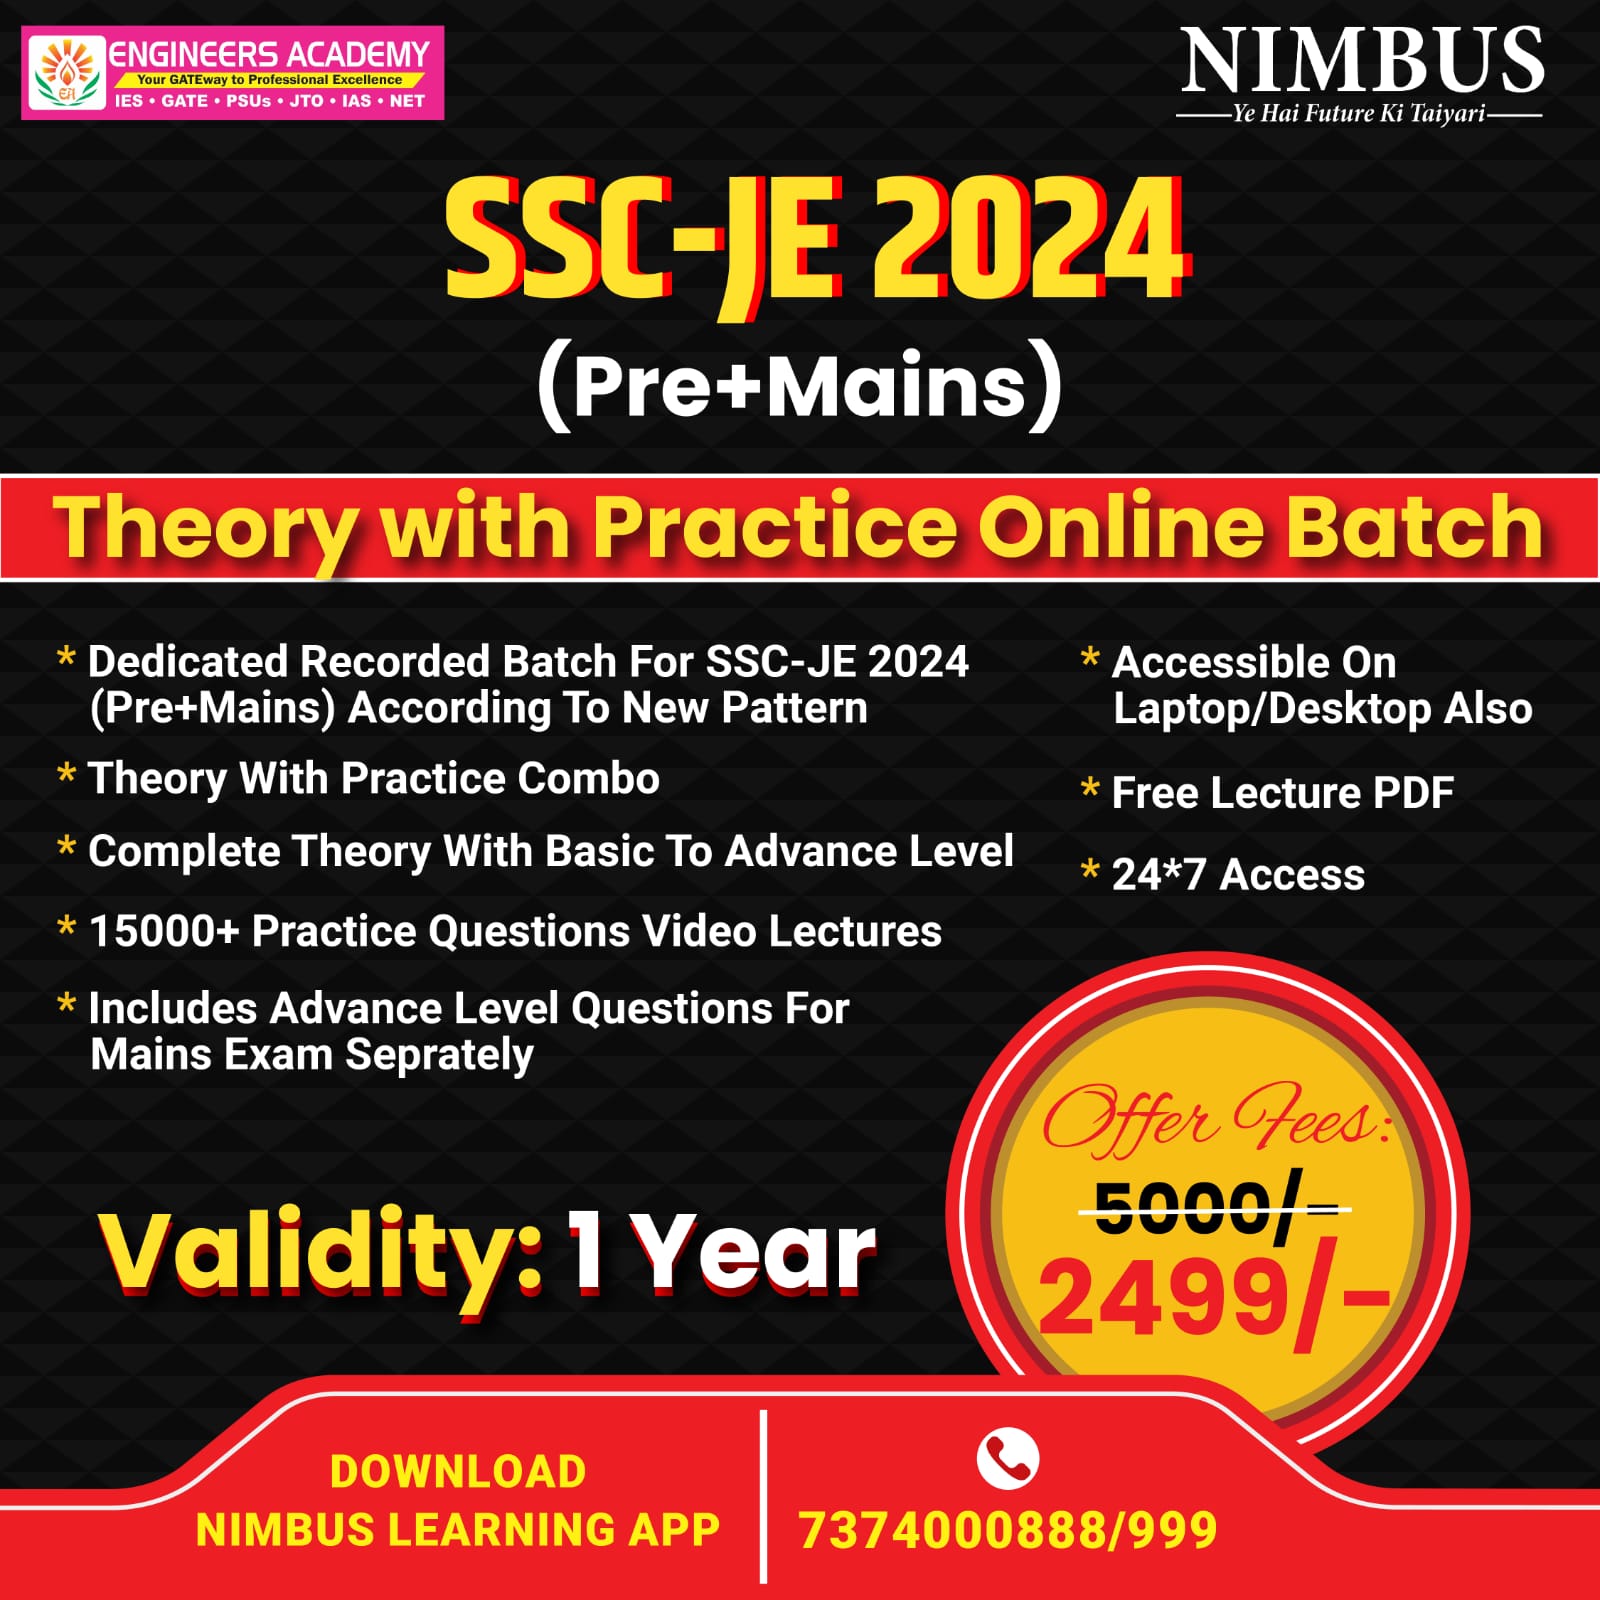 SSC JE 2024 Pre and Mains Online Coaching